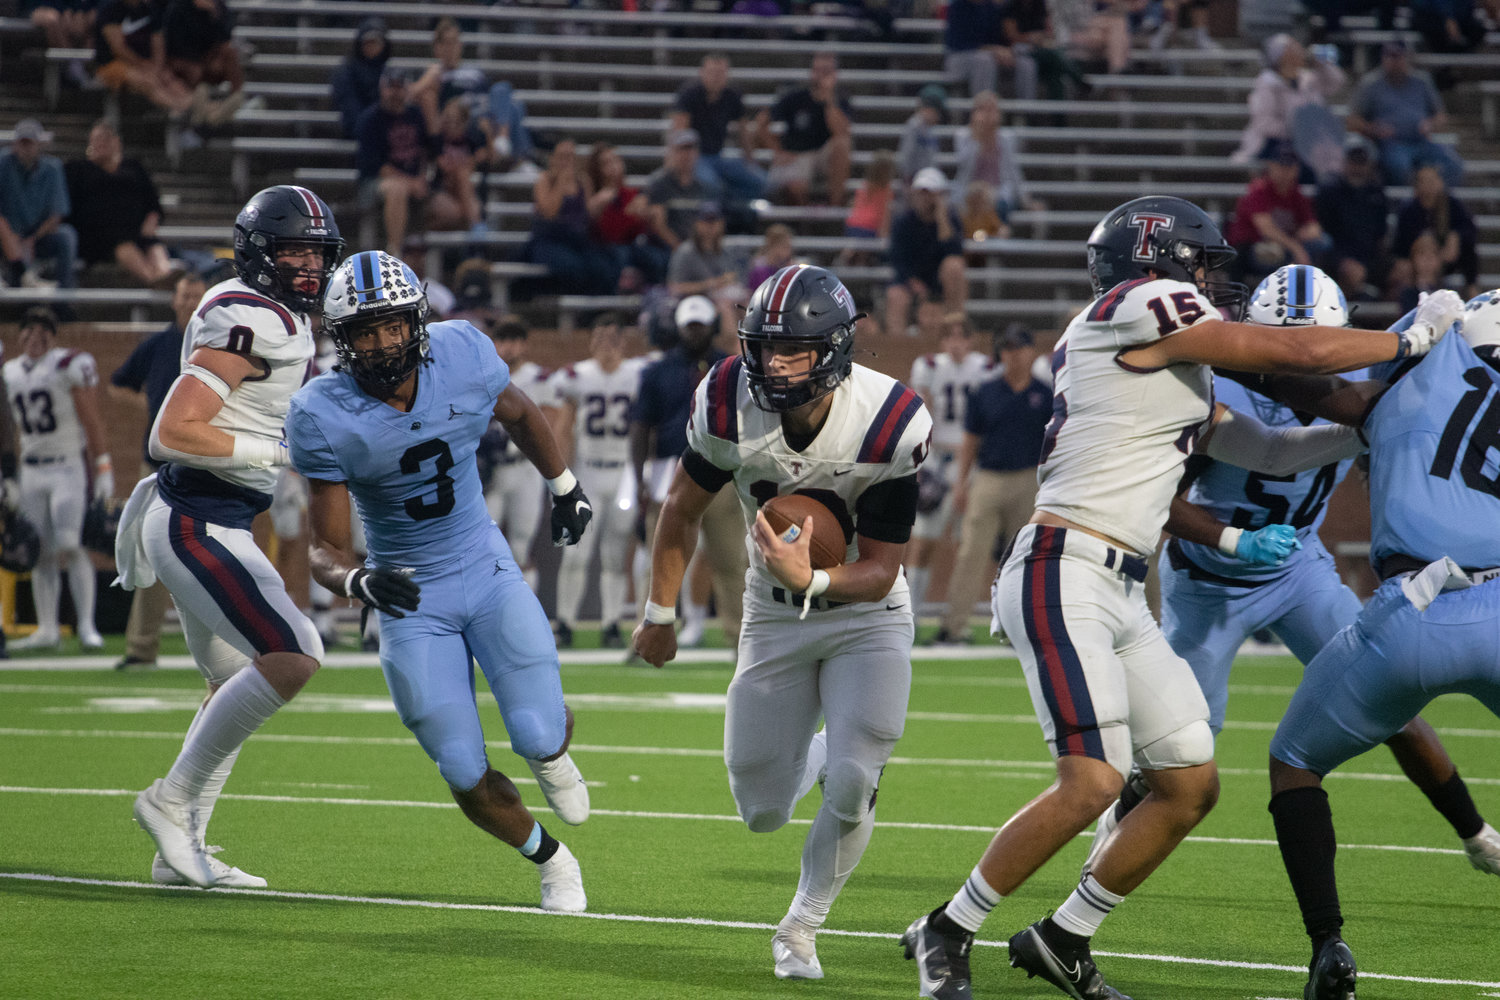 Tompkins' Wyatt Young runs during Friday's game between Tompkins and Paetow at Rhodes Stadium.